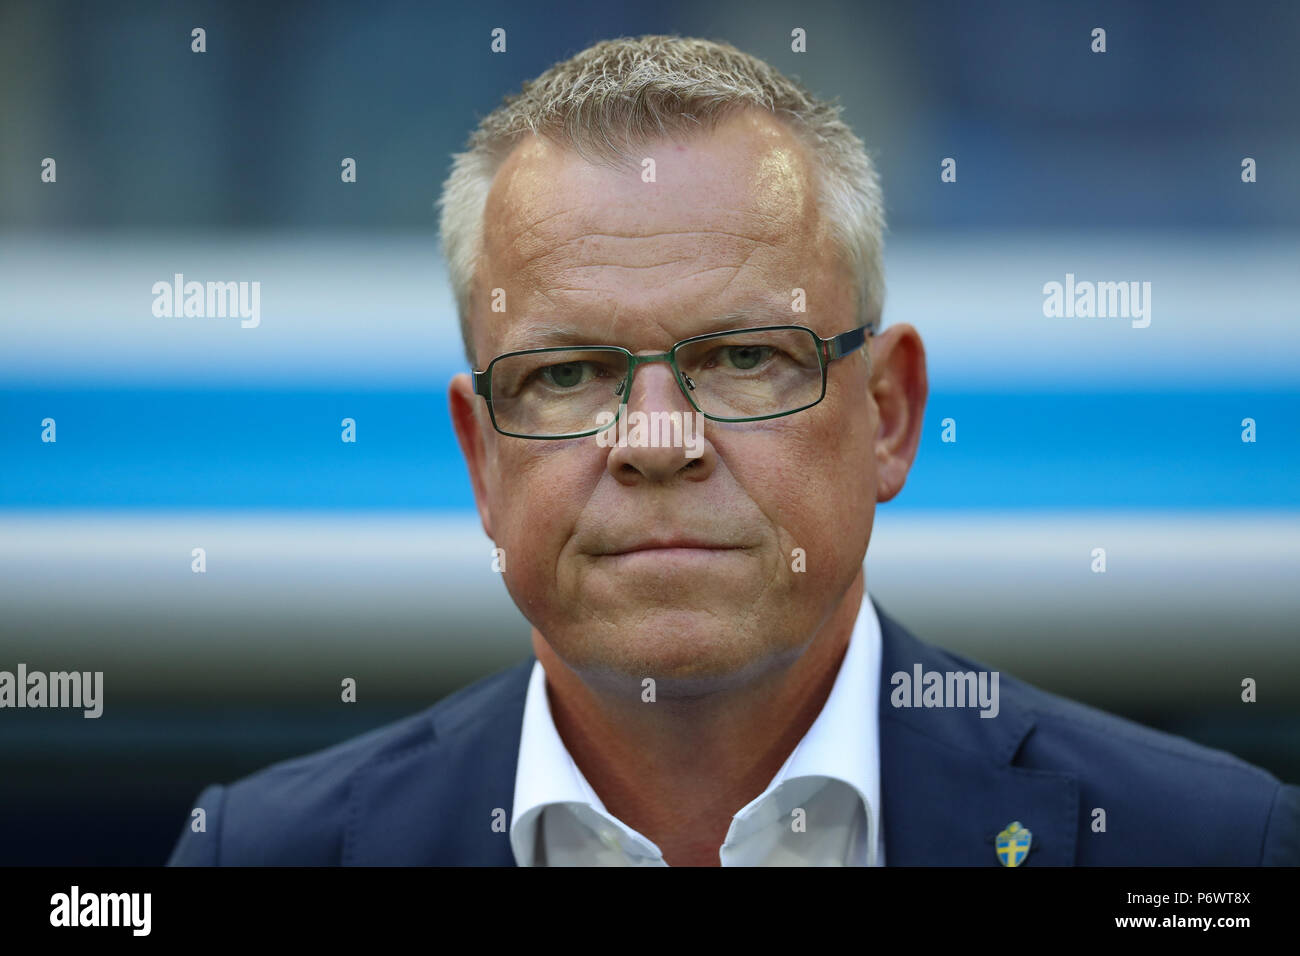 St Petersburg, Russia. 3rd July 2018.  Janne Andersson during the match between Sweden and Switzerland, valid for the eighth round of the 2018 World Cup held at St Petersburg in St Petersburg, Russia. (Photo: Ricardo Moreira/Fotoarena) Credit: Foto Arena LTDA/Alamy Live News Credit: Foto Arena LTDA/Alamy Live News Stock Photo